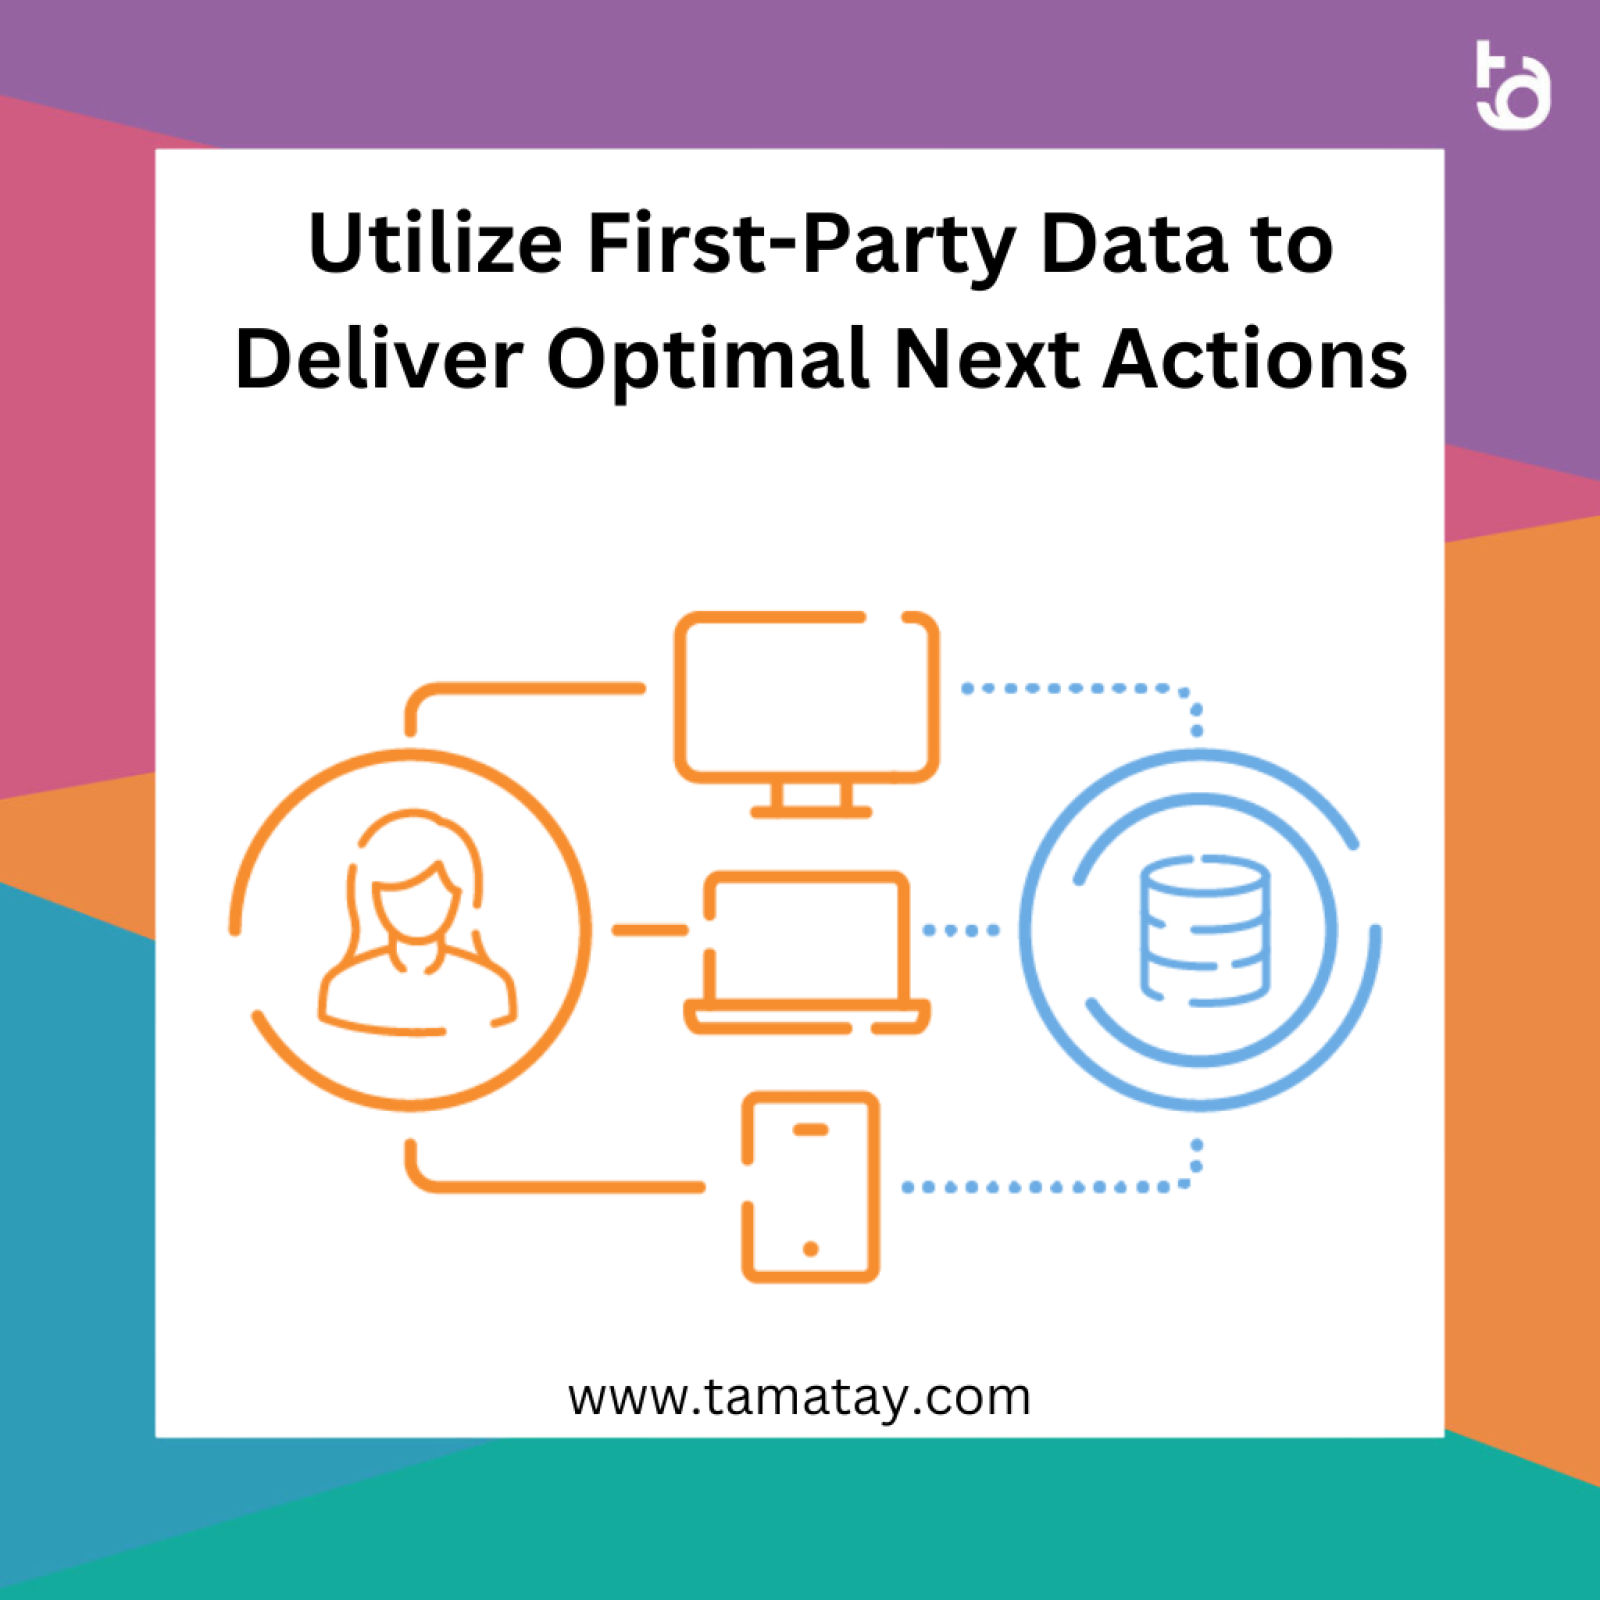 Utilize First-Party Data to Deliver Optimal Next Actions